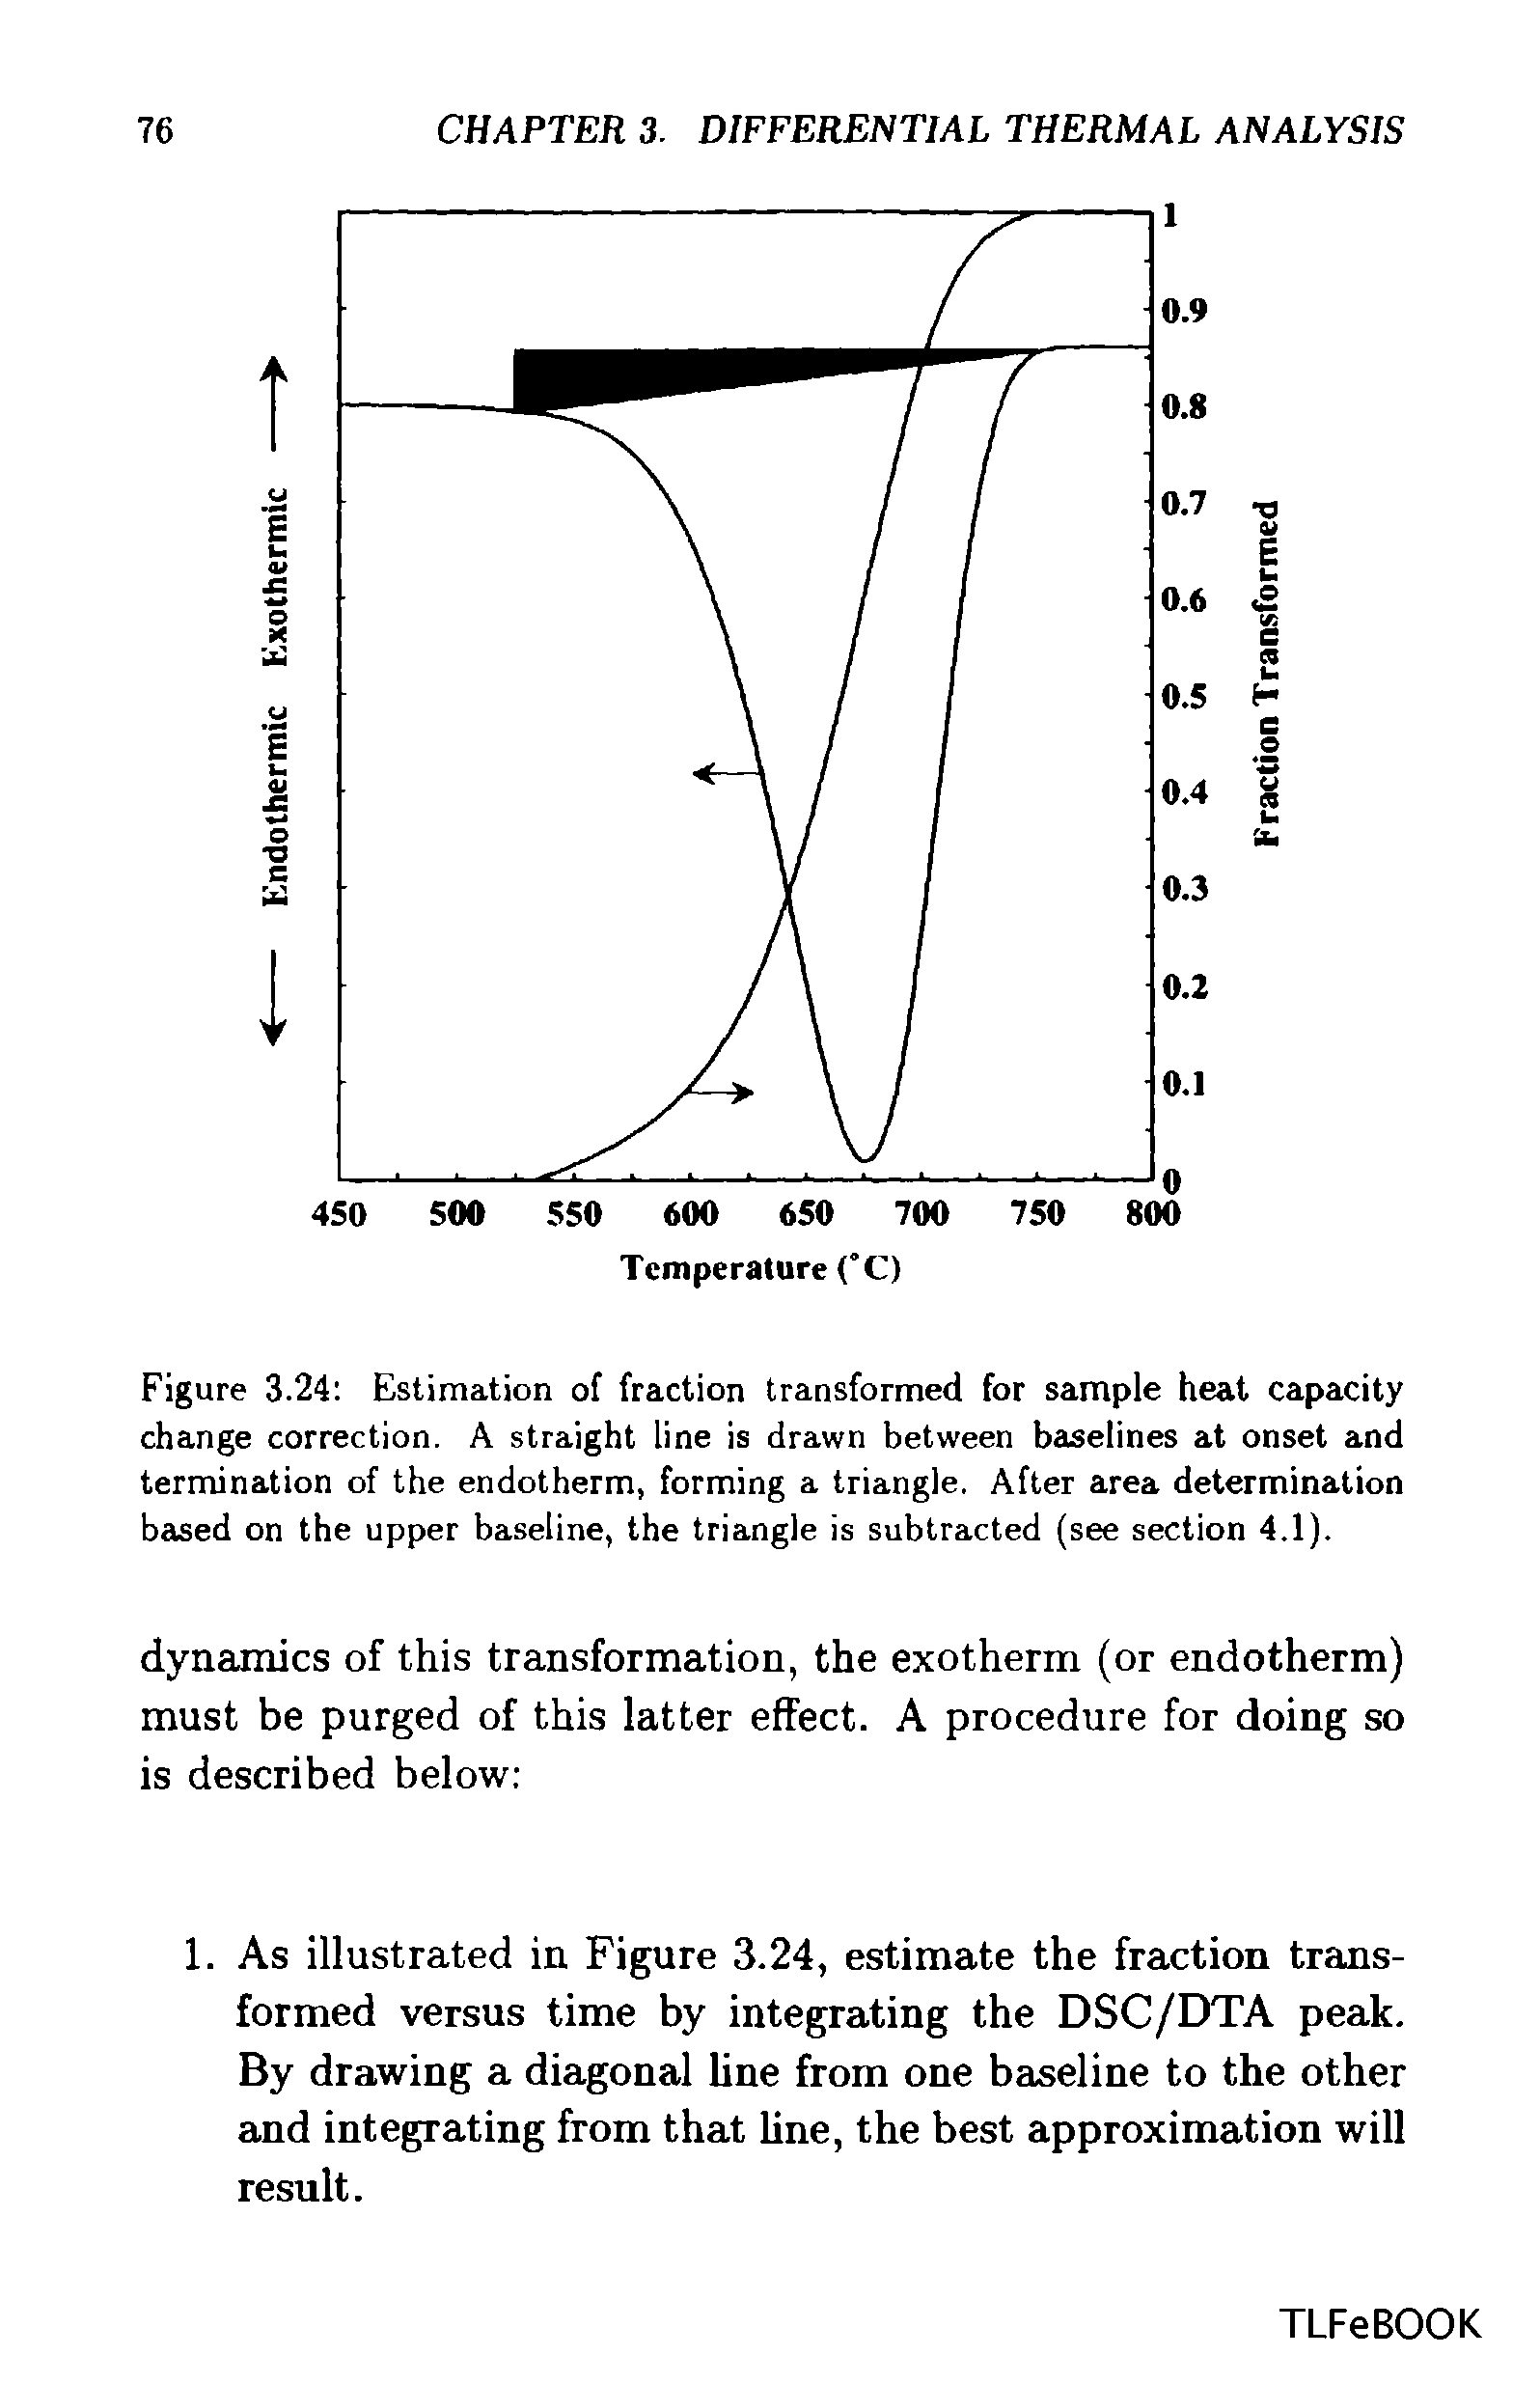 Figure 3.24 Estimation of fraction transformed for sample heat capacity change correction. A straight line is drawn between baselines at onset and termination of the endotherm, forming a triangle. After area determination based on the upper baseline, the triangle is subtracted (see section 4.1).